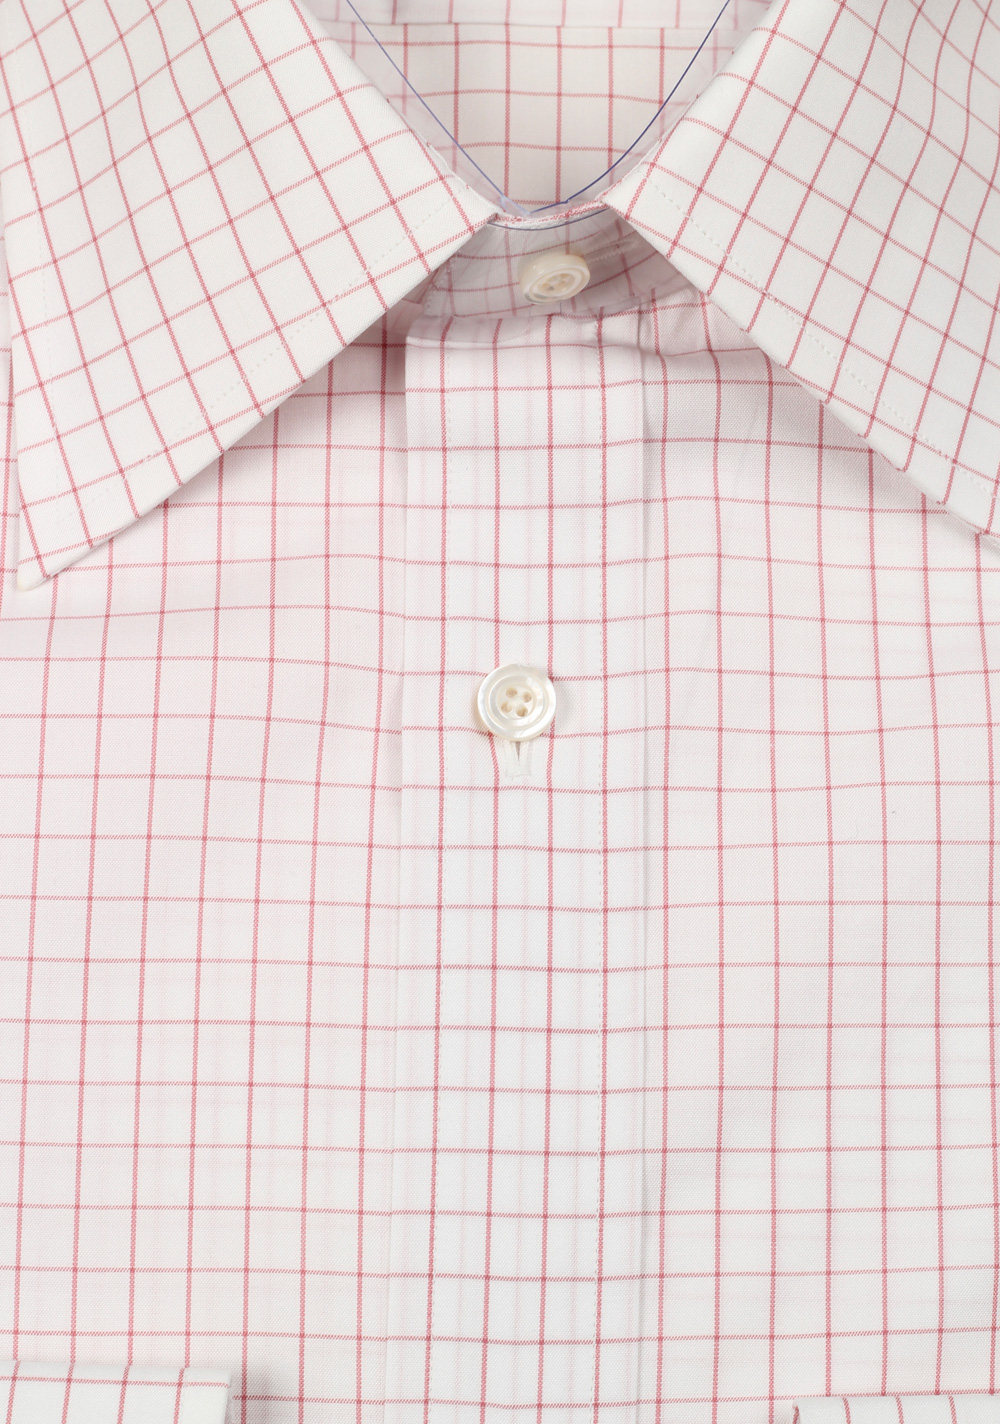 TOM FORD Checked White Pink Dress Shirt Size 40 / 15,75 U.S. | Costume Limité